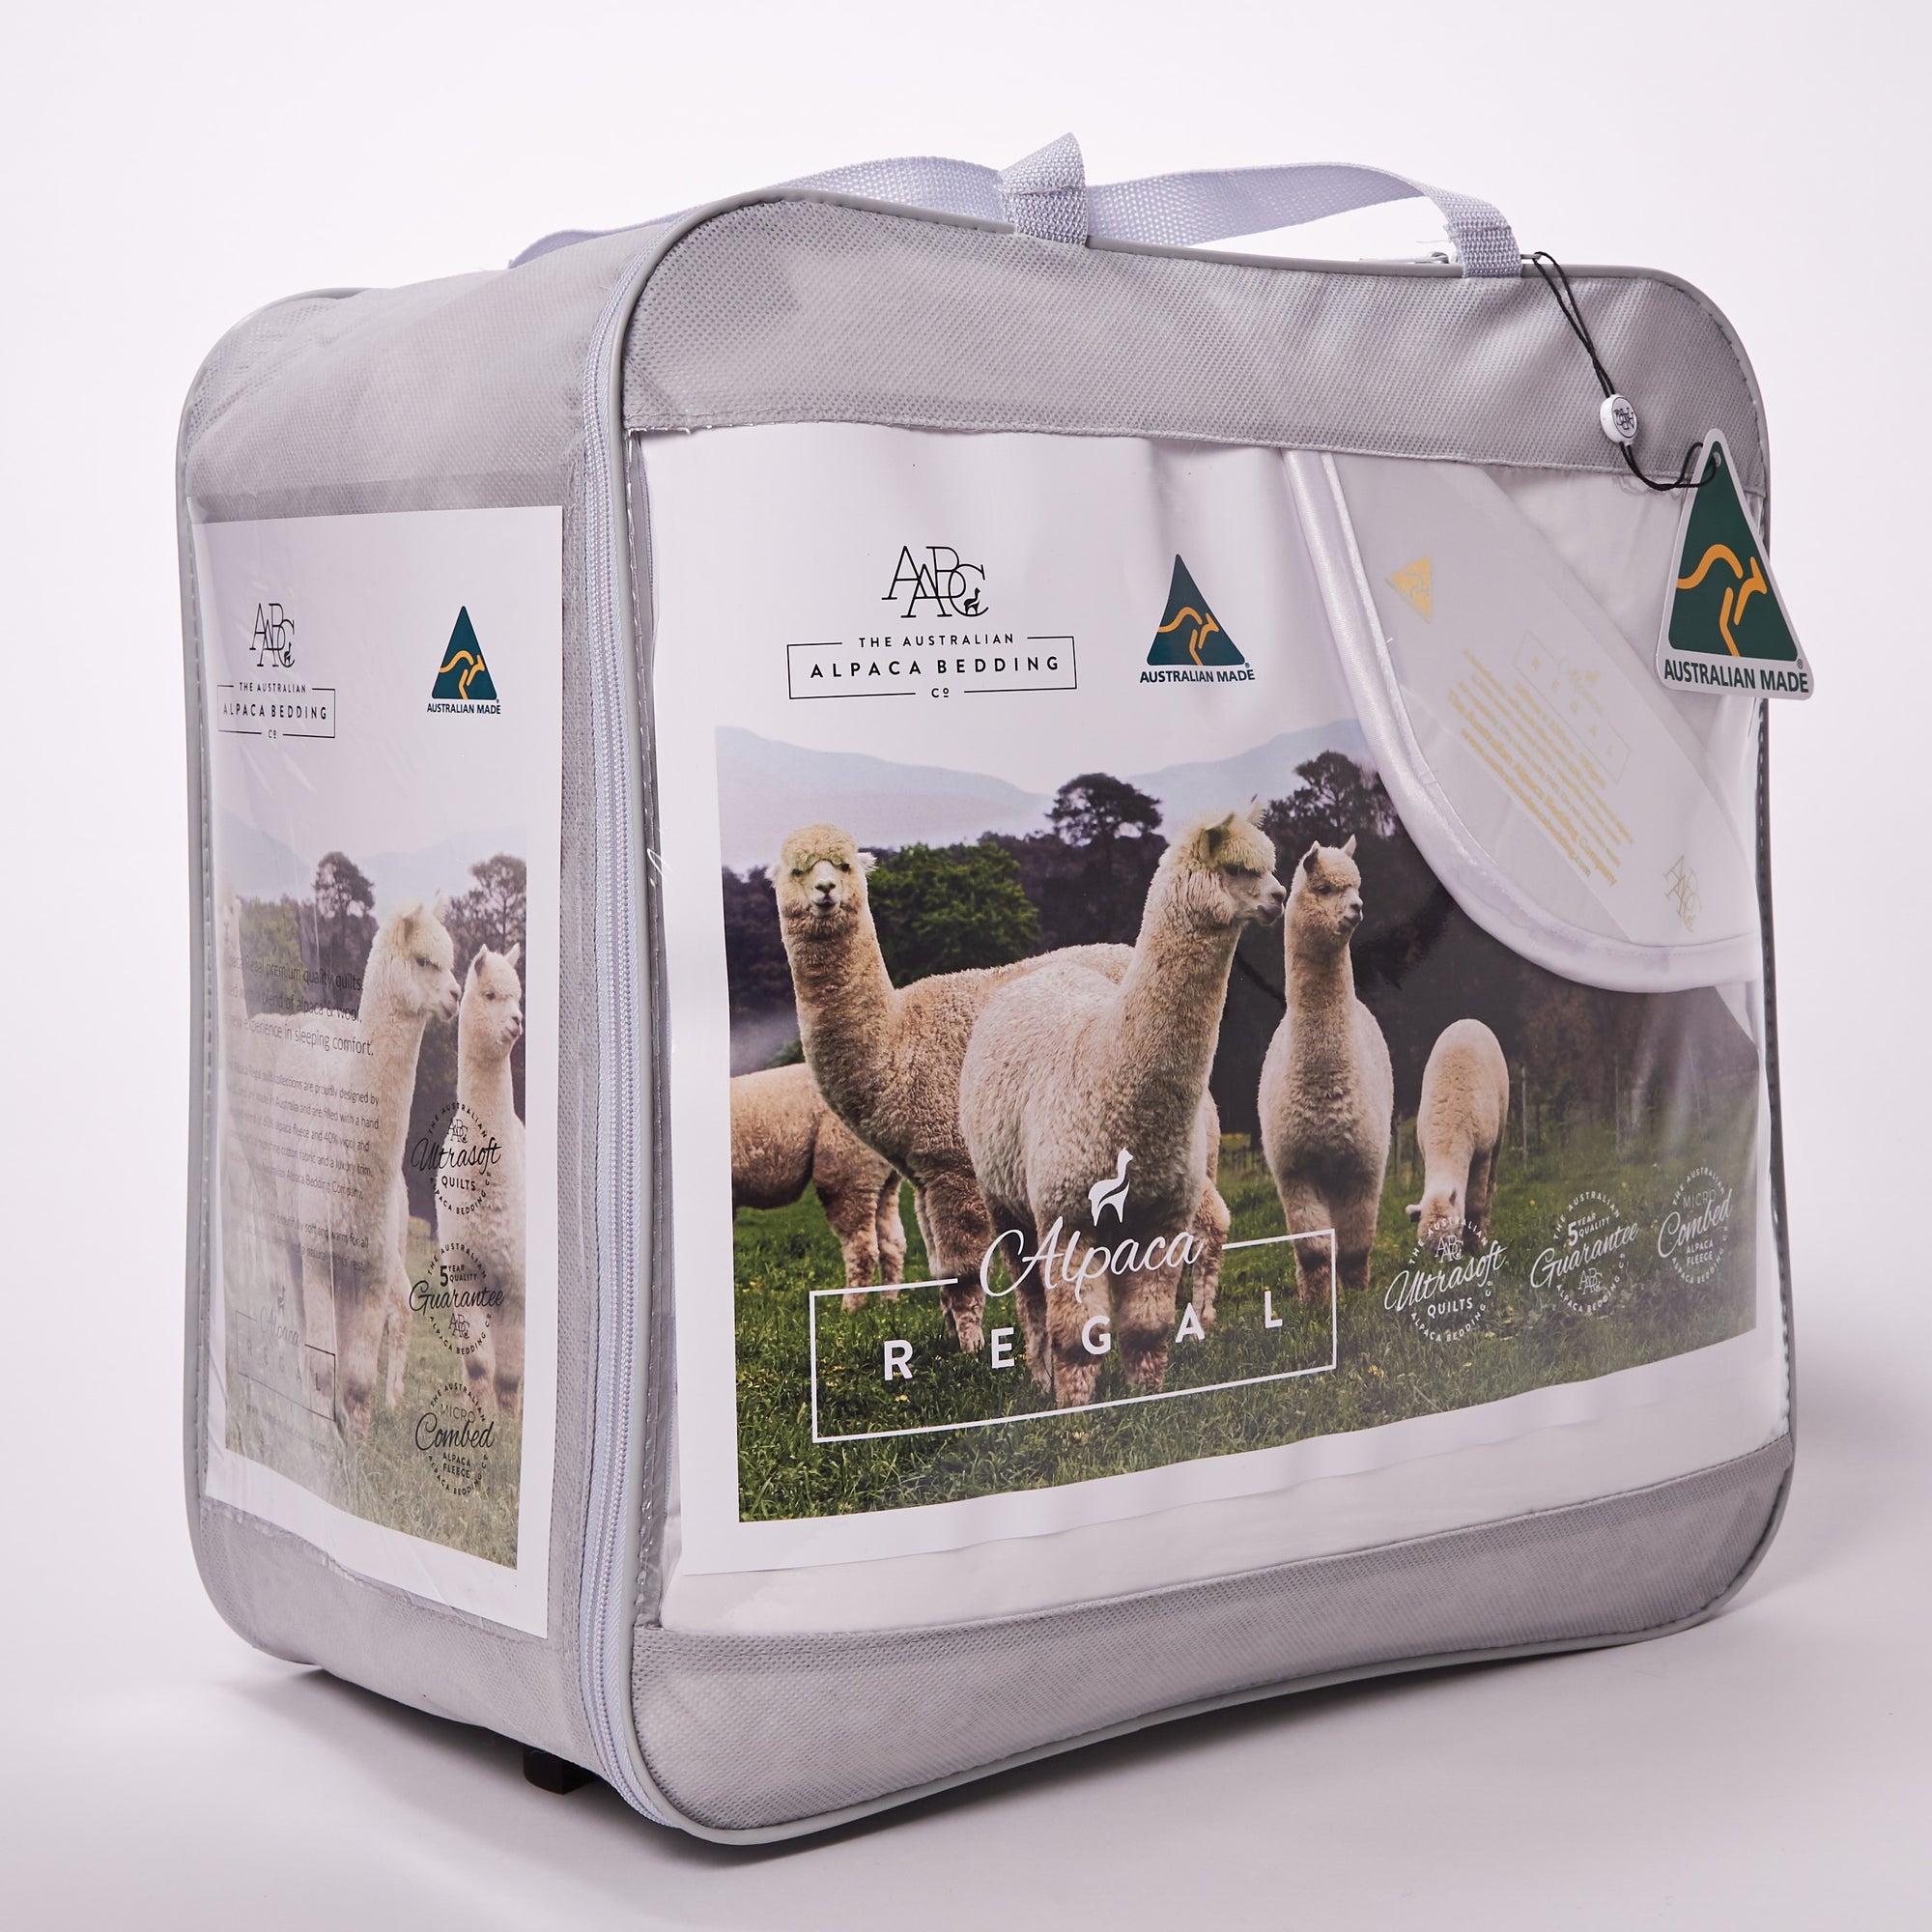 AABC Alpaca Regal quilt packaging with Australian alpacas on the front and side panels.